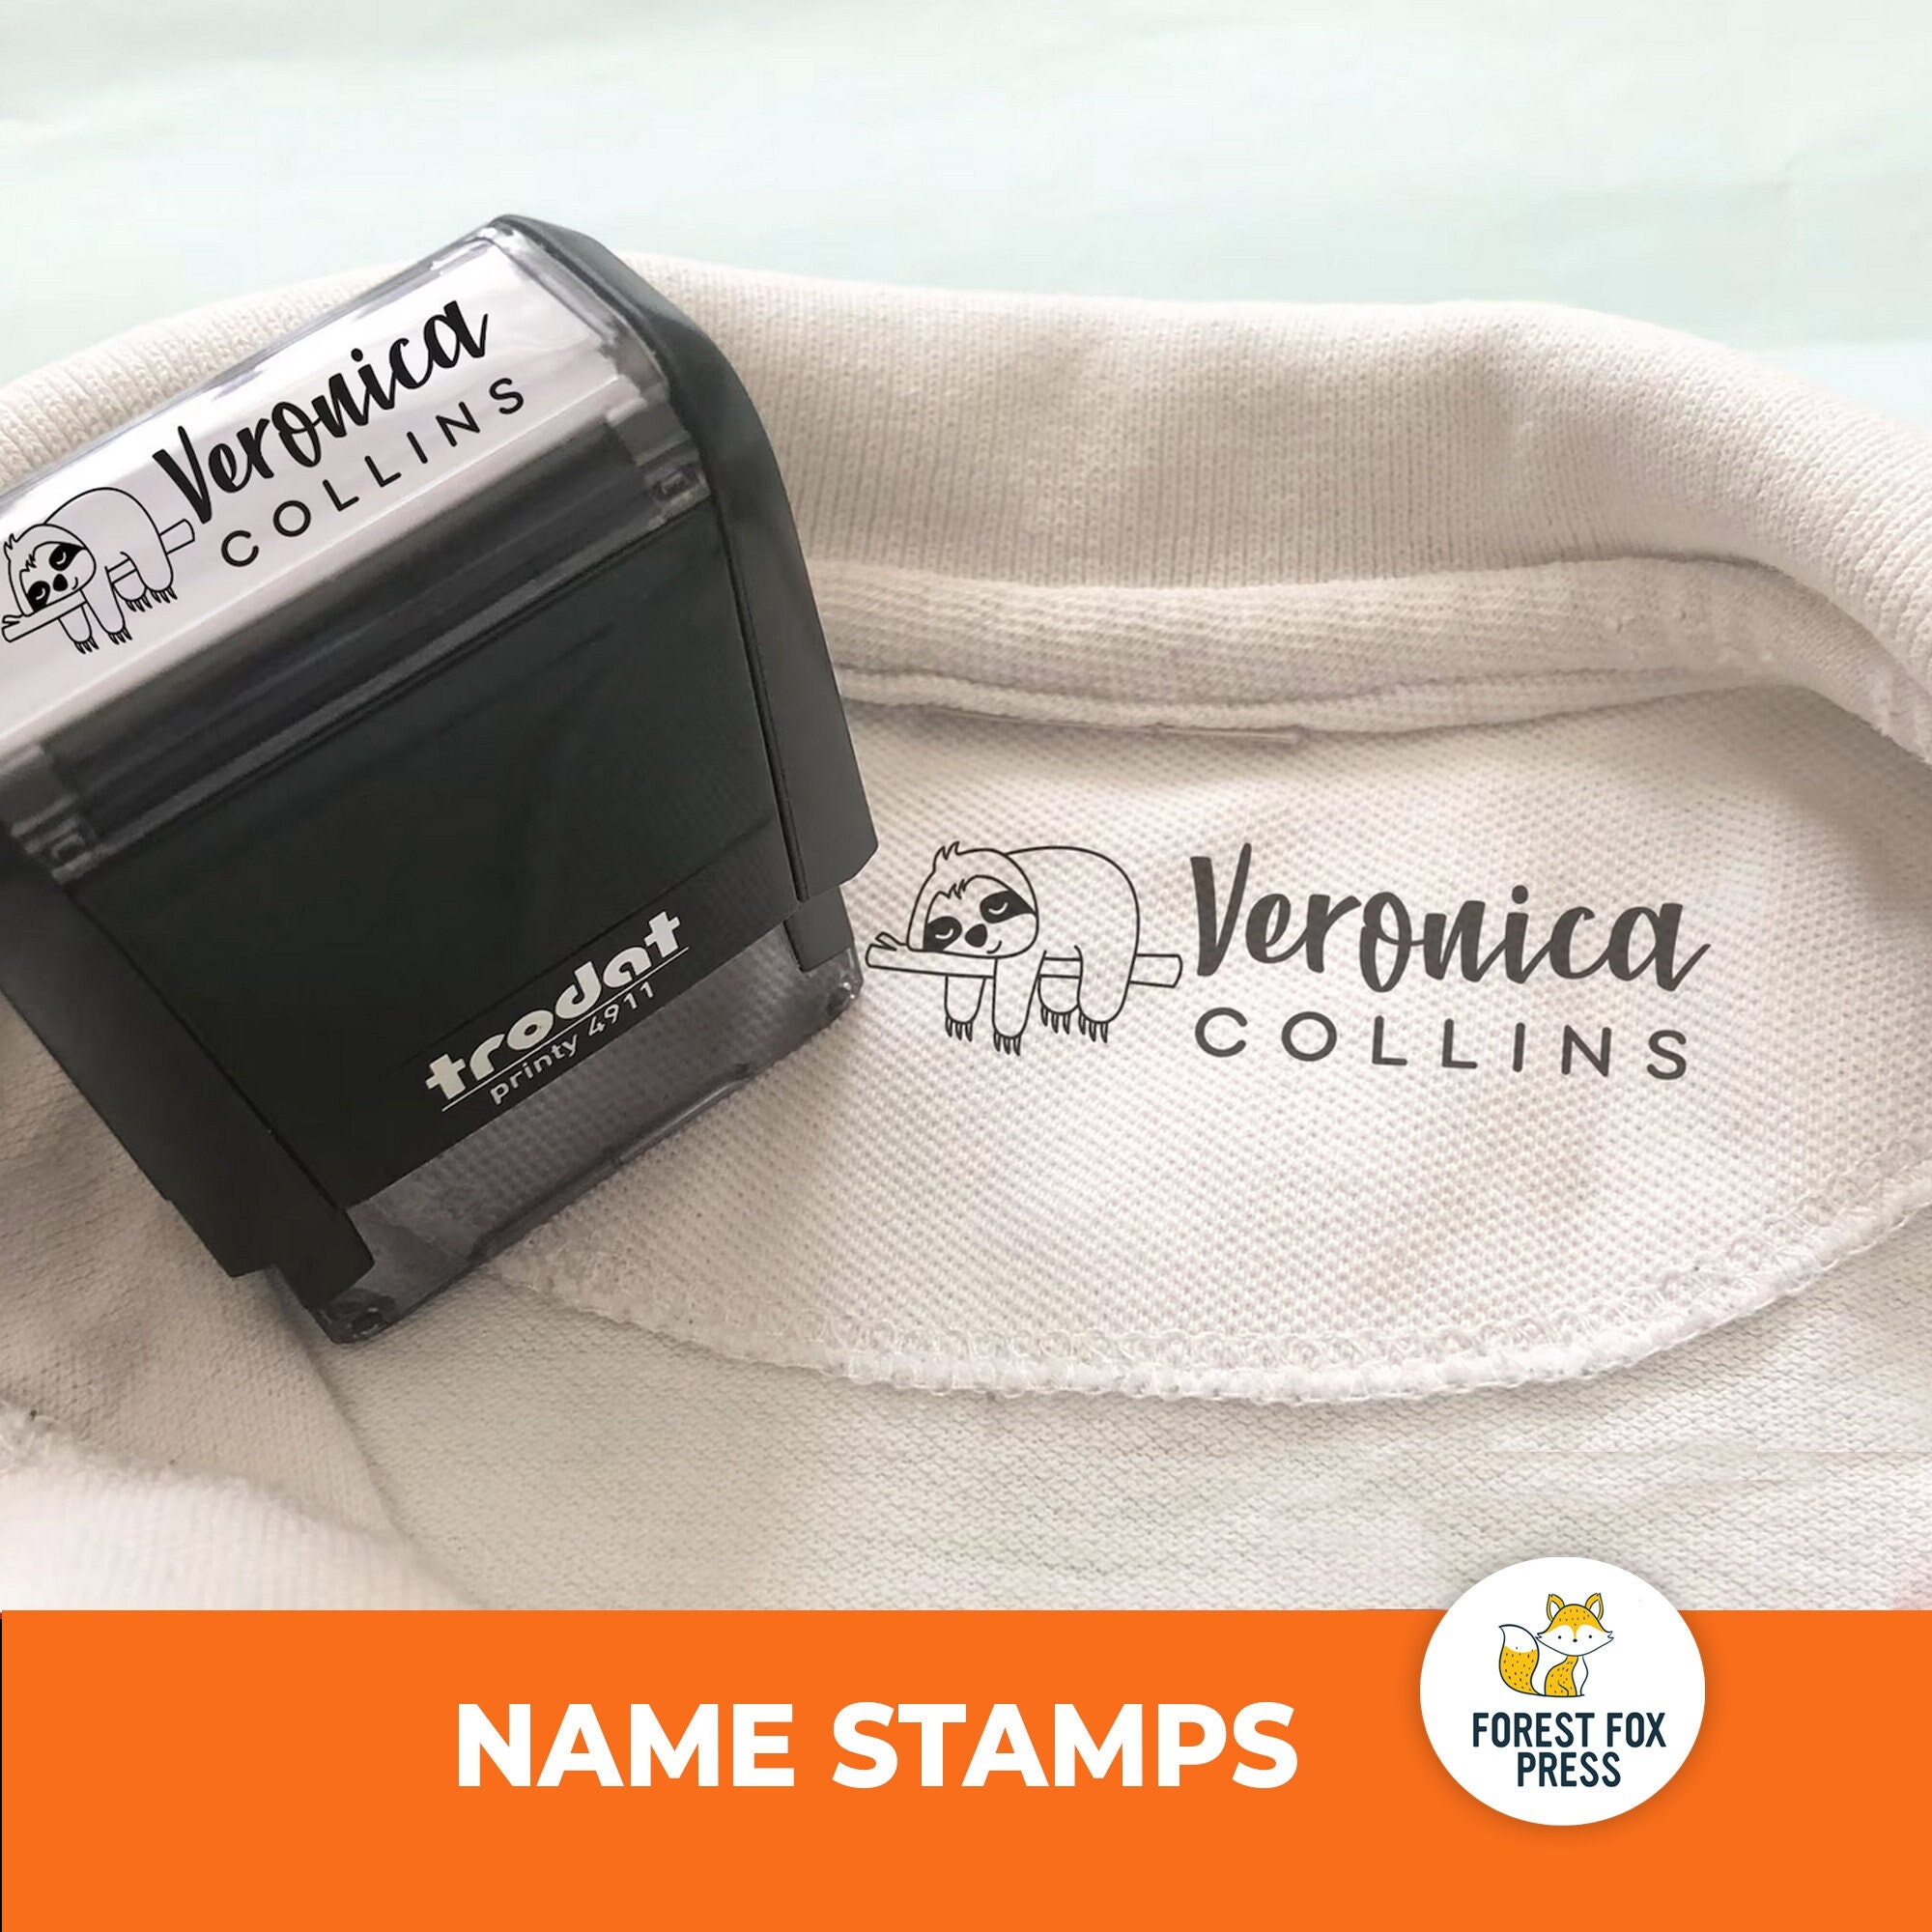 Clothing Stamp, Personalized Self-inking Stamp, Clothing Marker Stamp,  FABRIC Textile Stamp, Cloth Stamp, Label Clothing trodat 4911 -  Norway